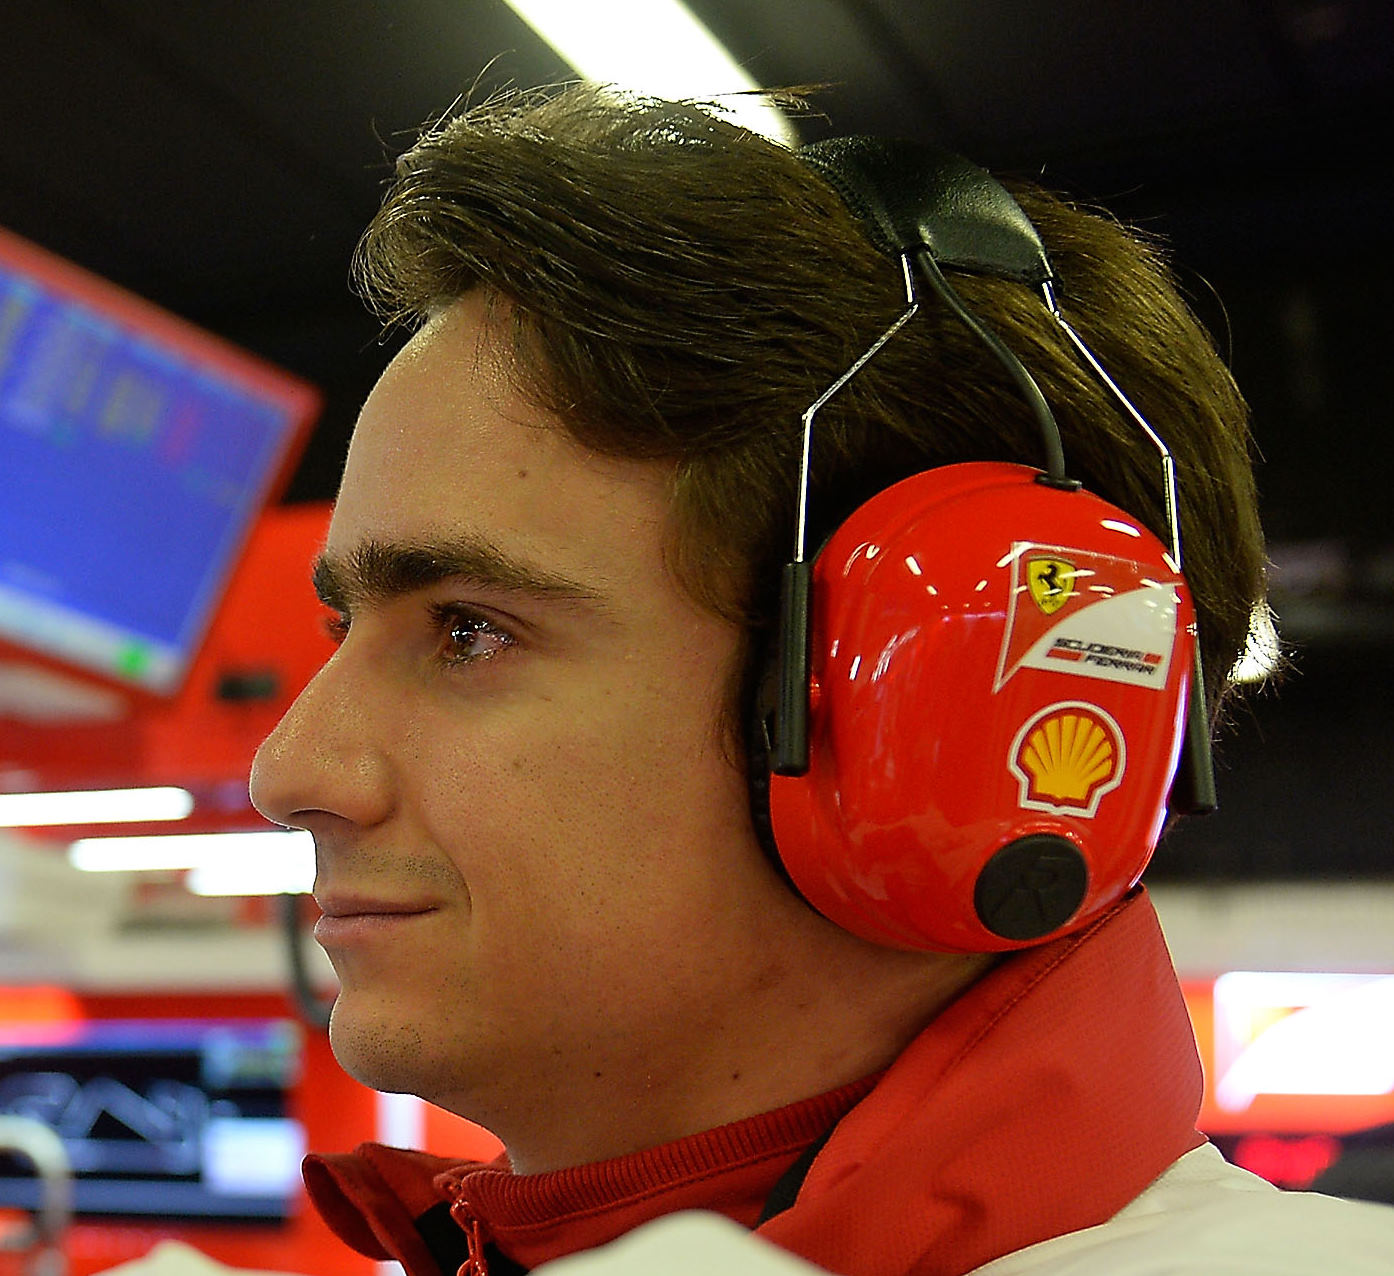 Esteban Gutierrez eyes a Ferrari seat - the Haas team is the best seat his check can buy for now